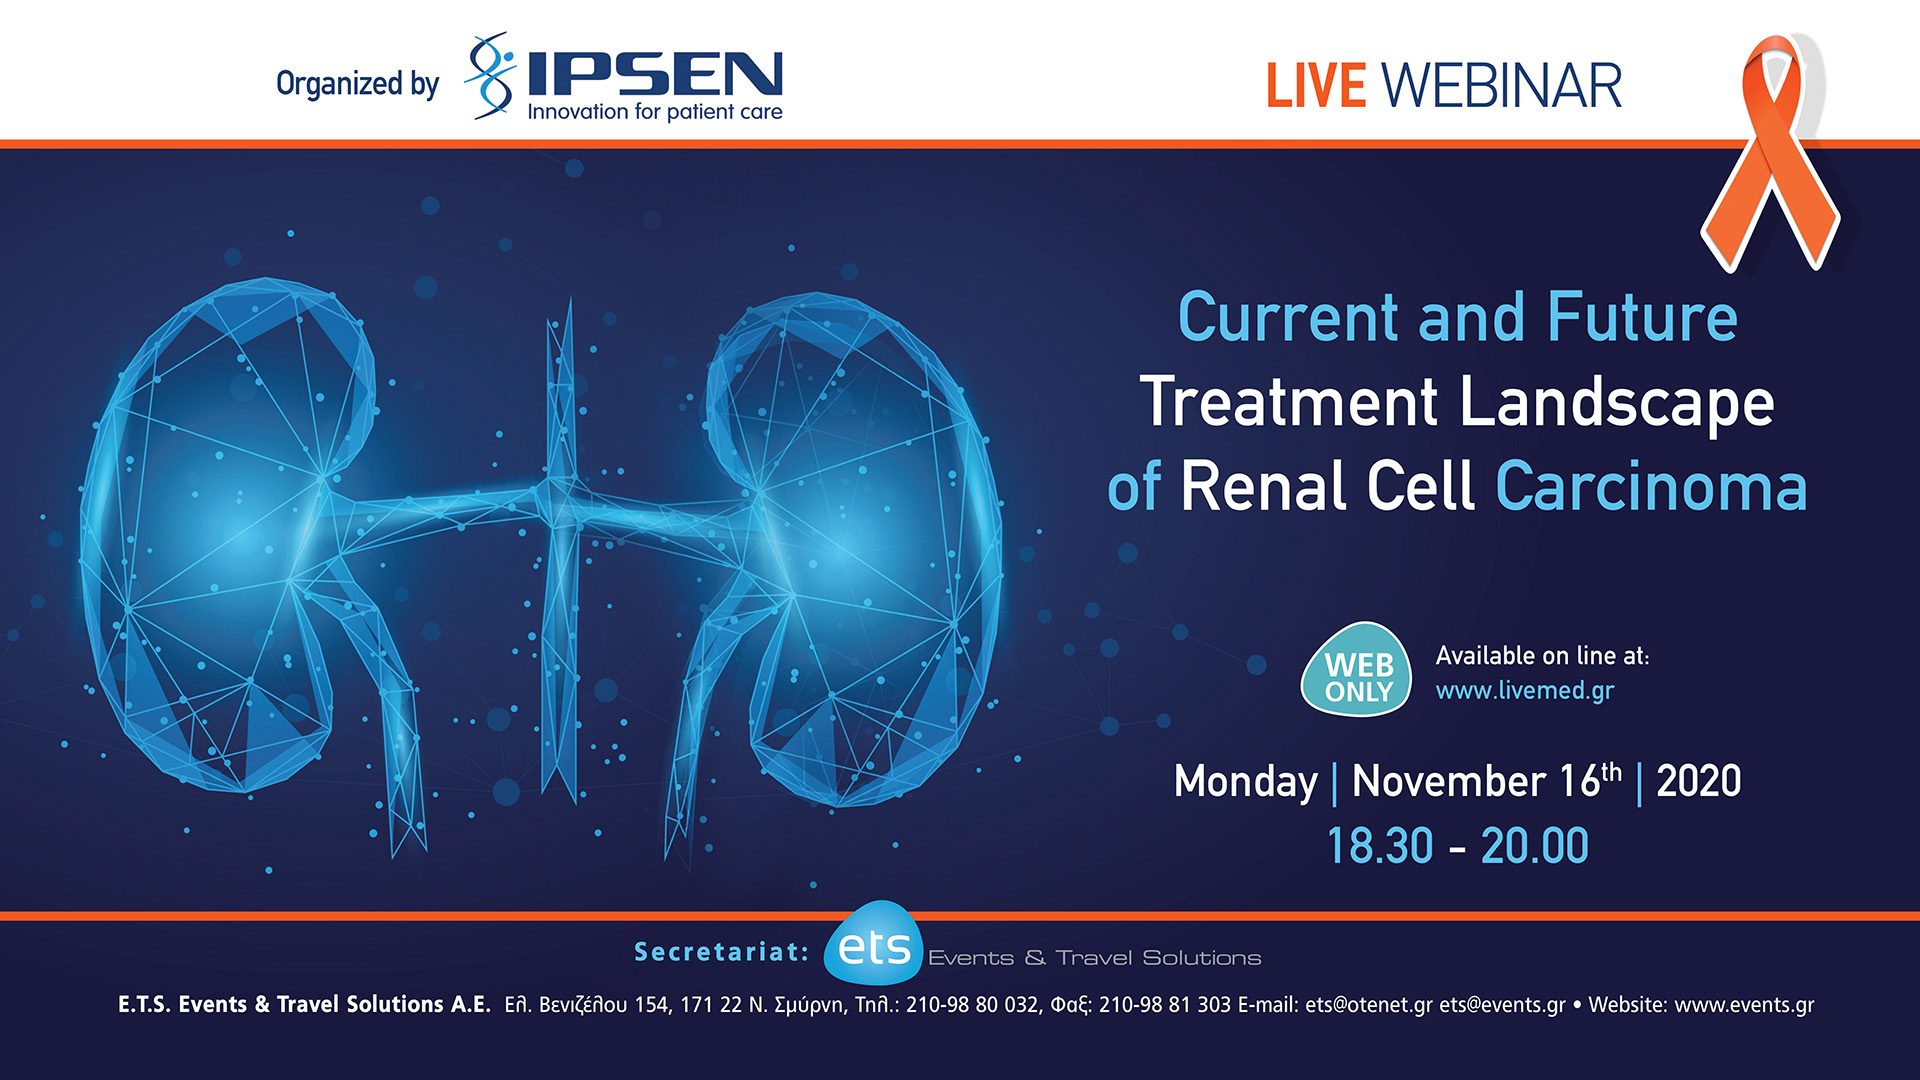 Live Webinar | Current and Future Treatment Landscape of Renal Cell Carcinoma